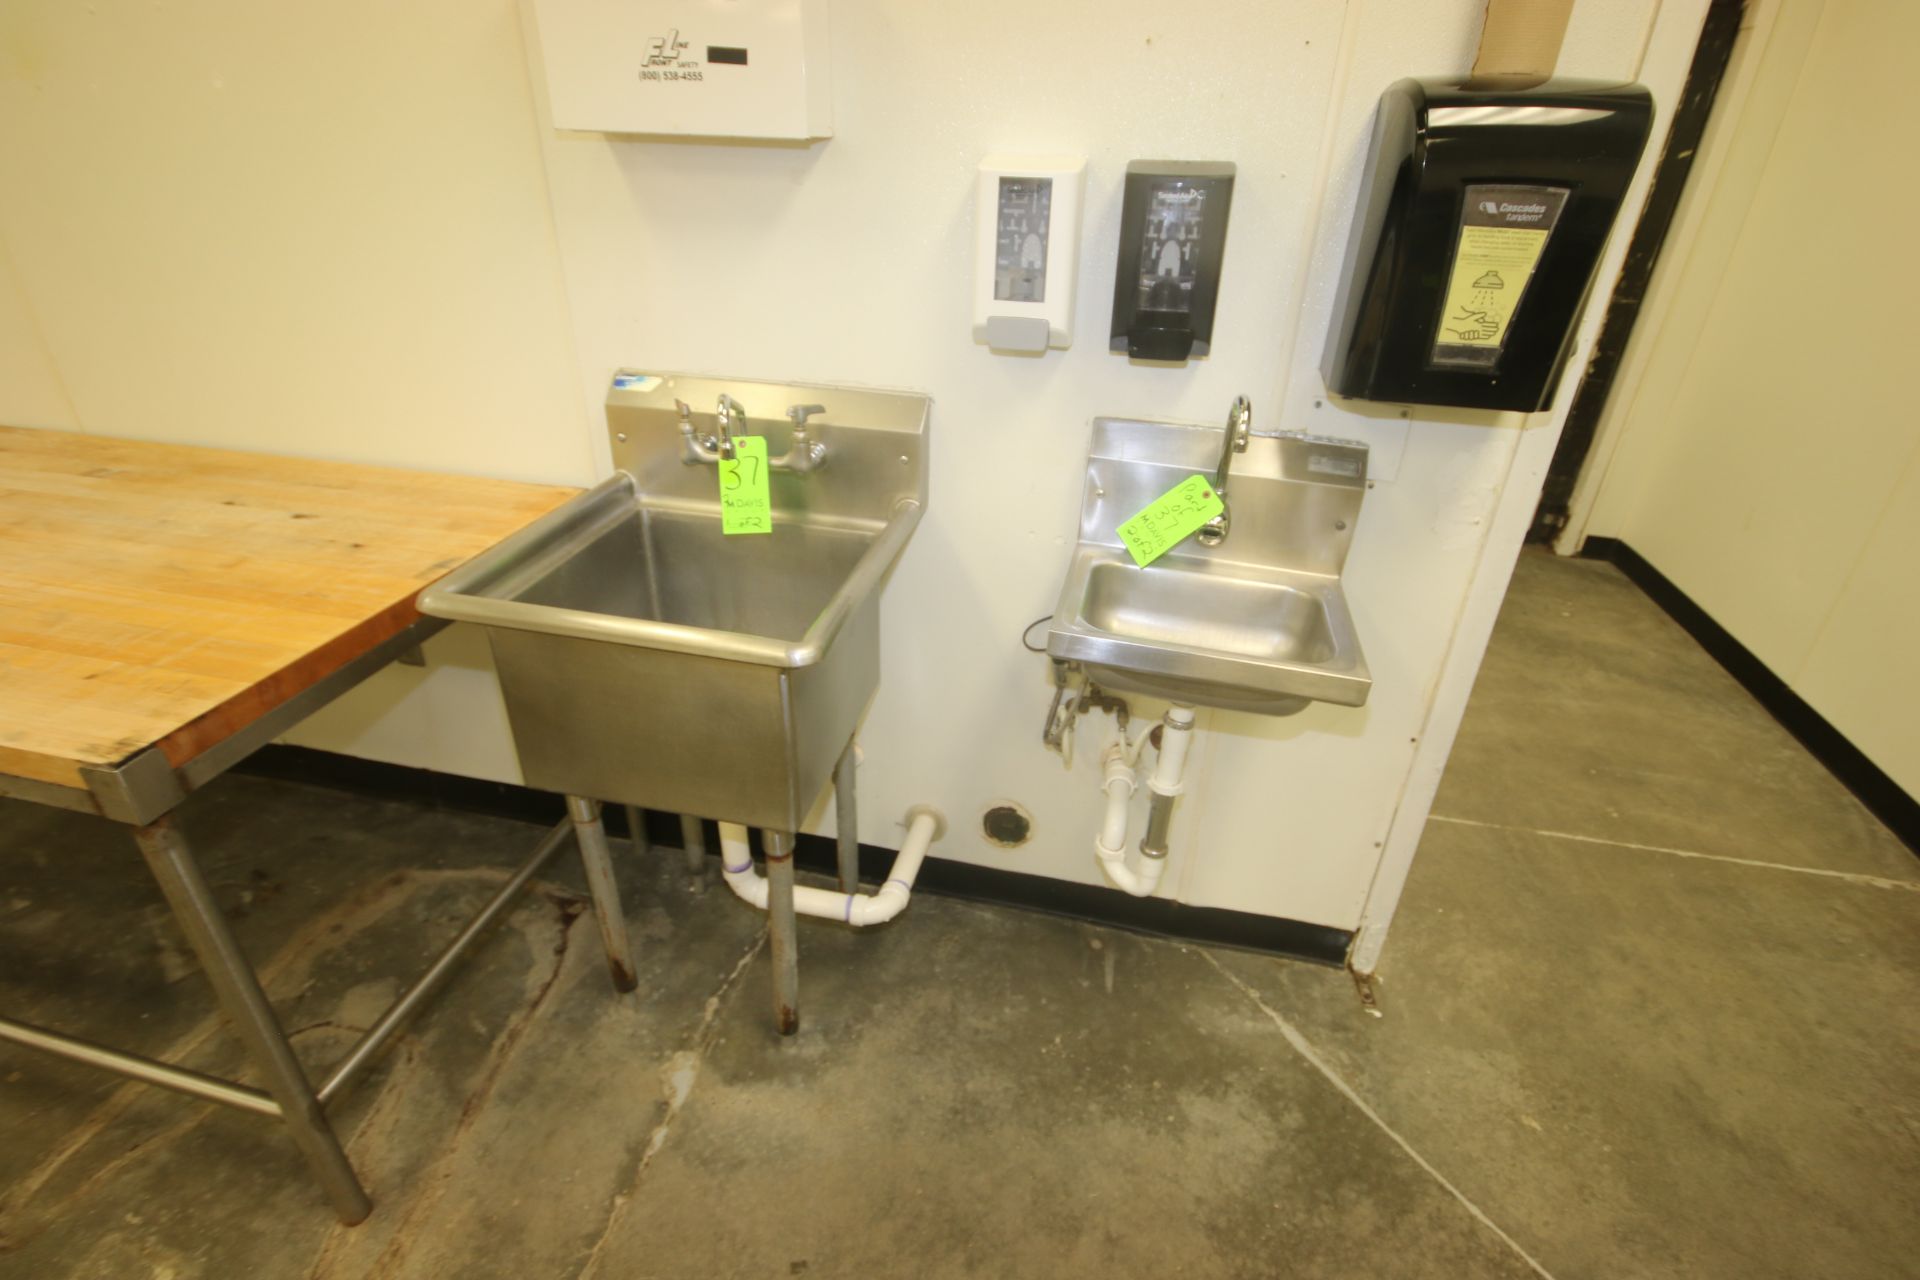 S/S Single Bowls Sinks, (1) On Legs & (1) Wall Mounted with Motion Spicket Control (LOCATED AT